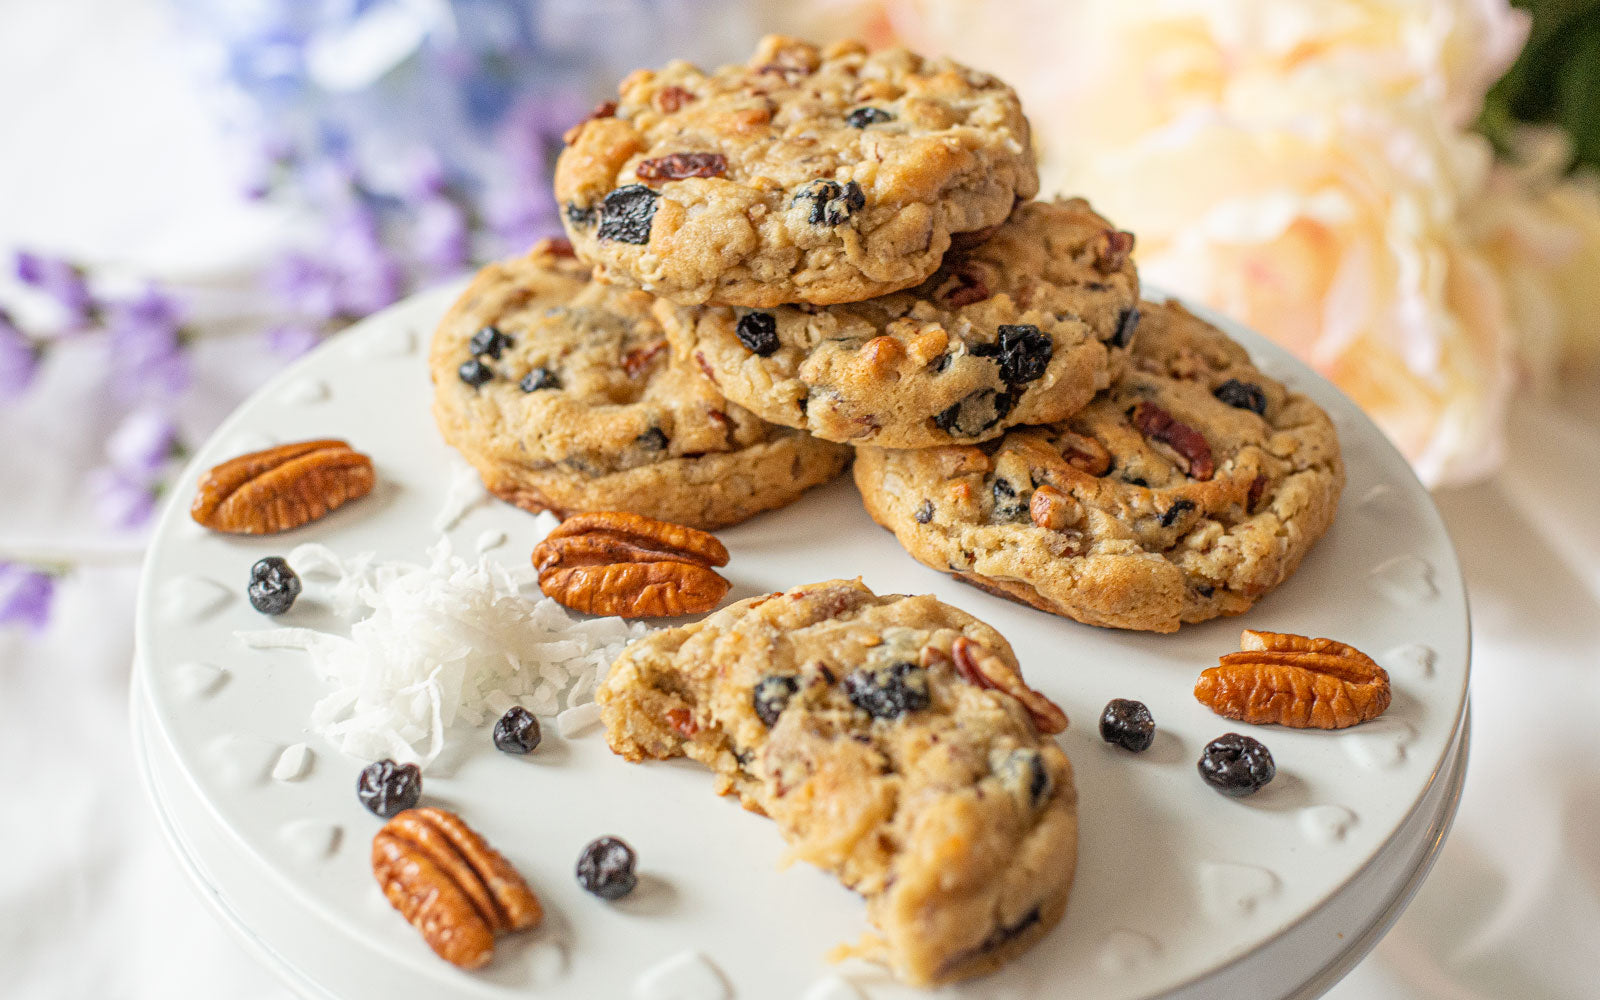 Blueberry coconut pecan cookies arranged on a plate, surrounded by shredded coconut, pecans, and dried blueberries.